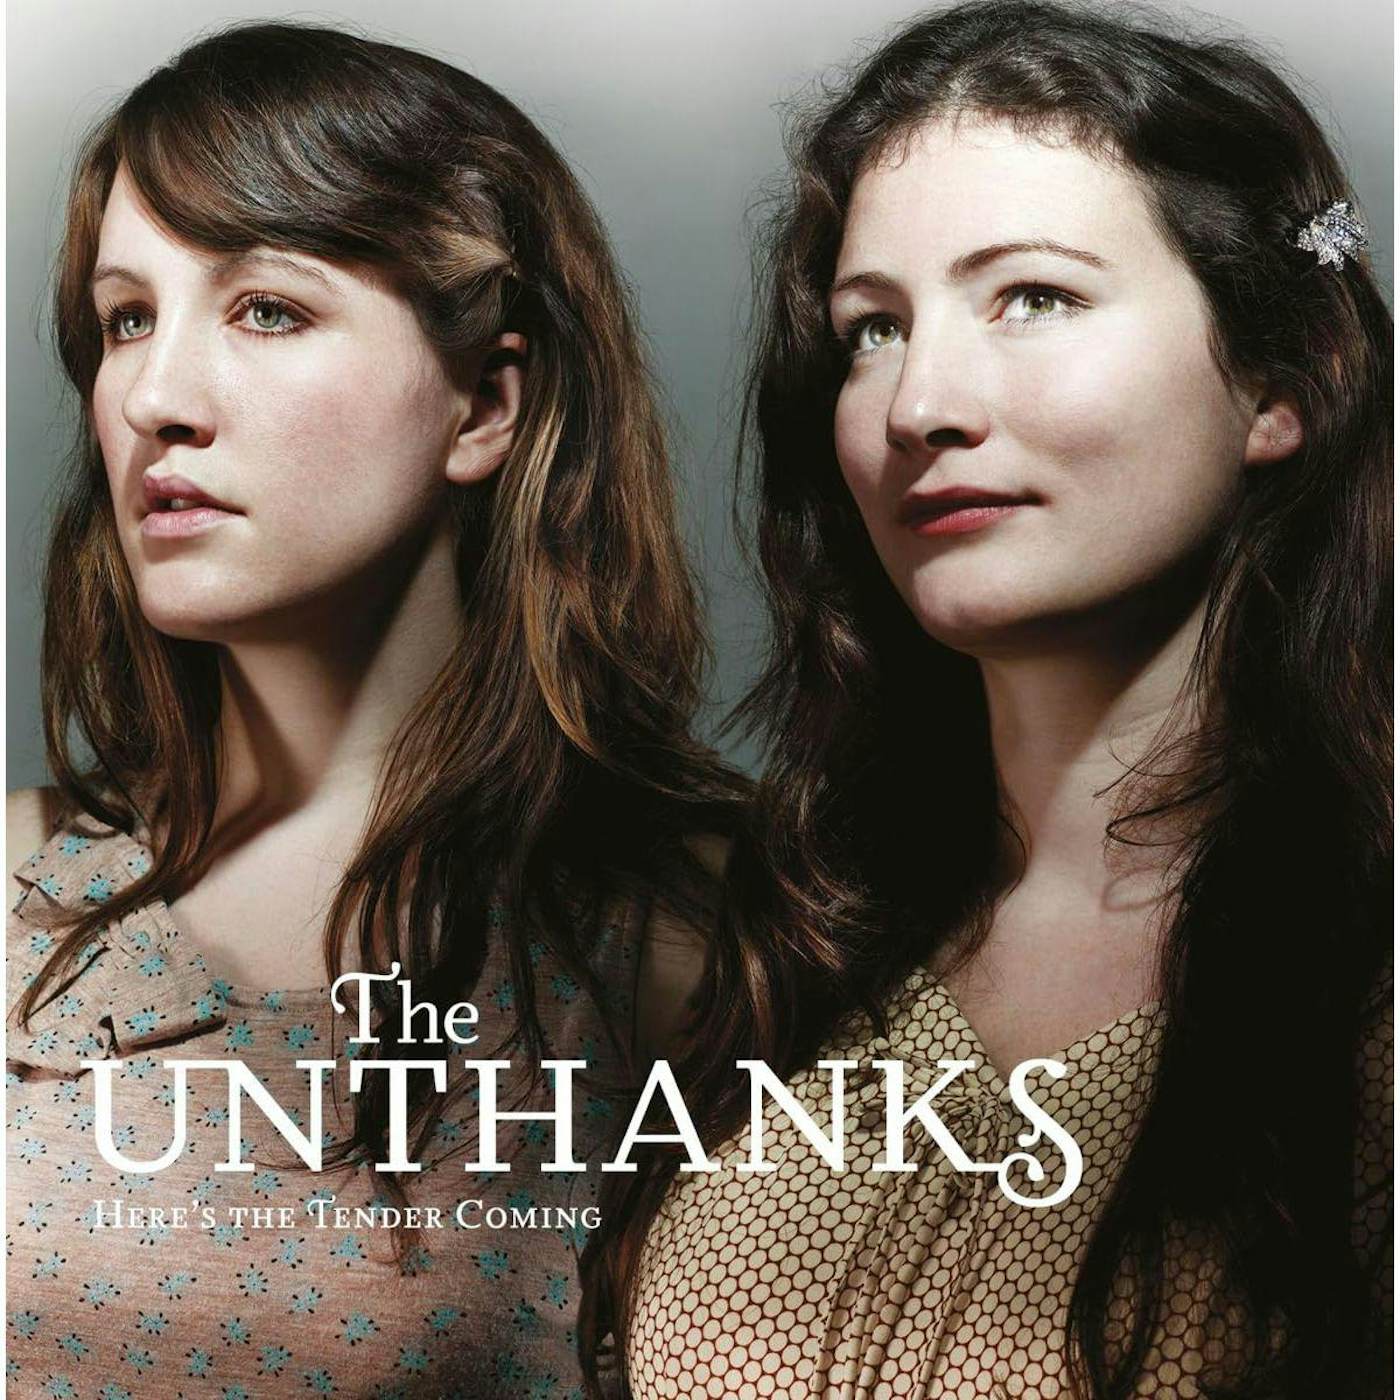 The Unthanks HERE'S THE TENDER COMING (2LP) Vinyl Record